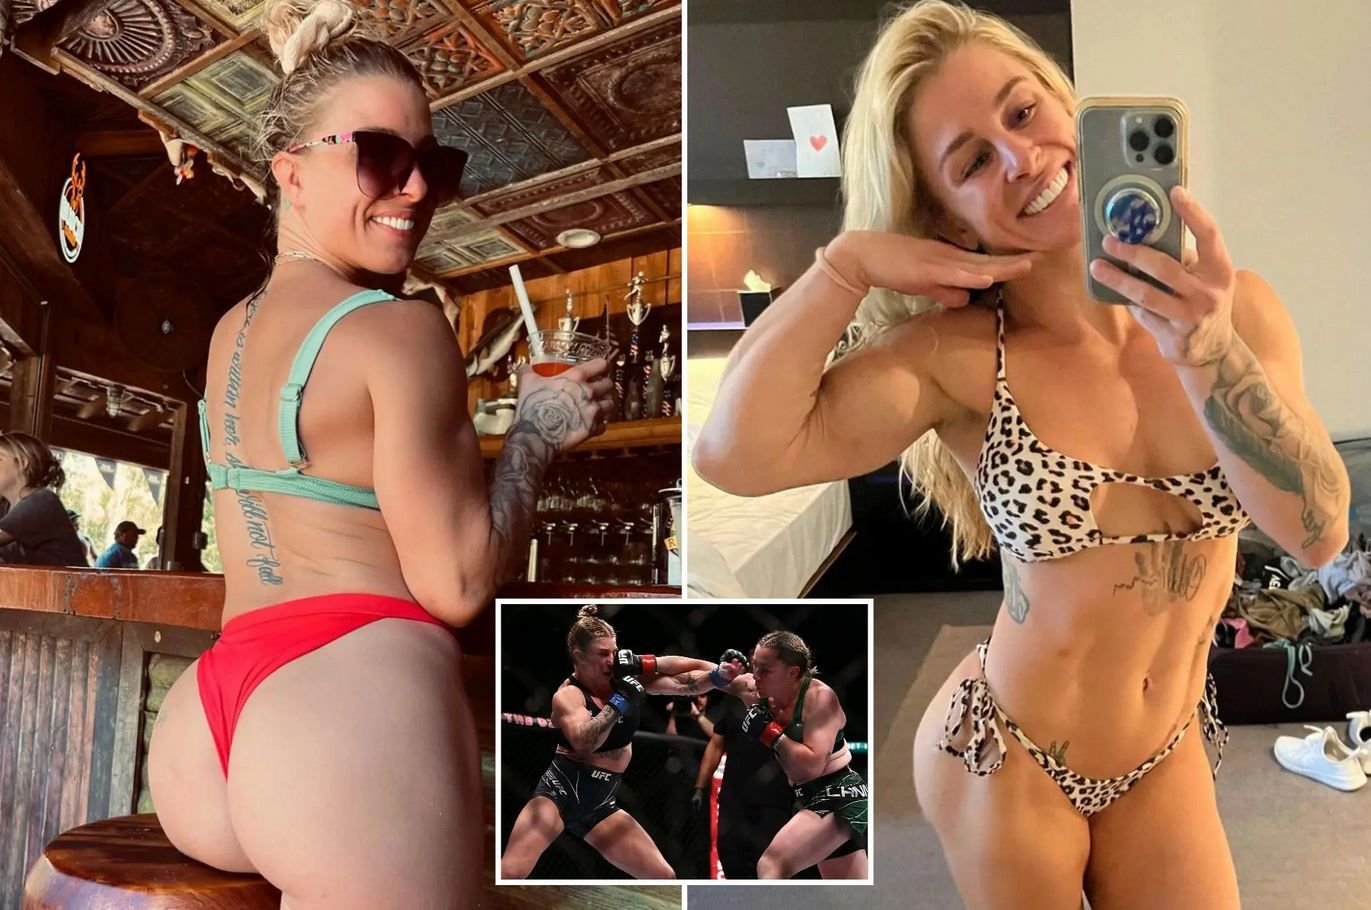 UFC fighter Goldy boasts her breasts in a revealing bikini